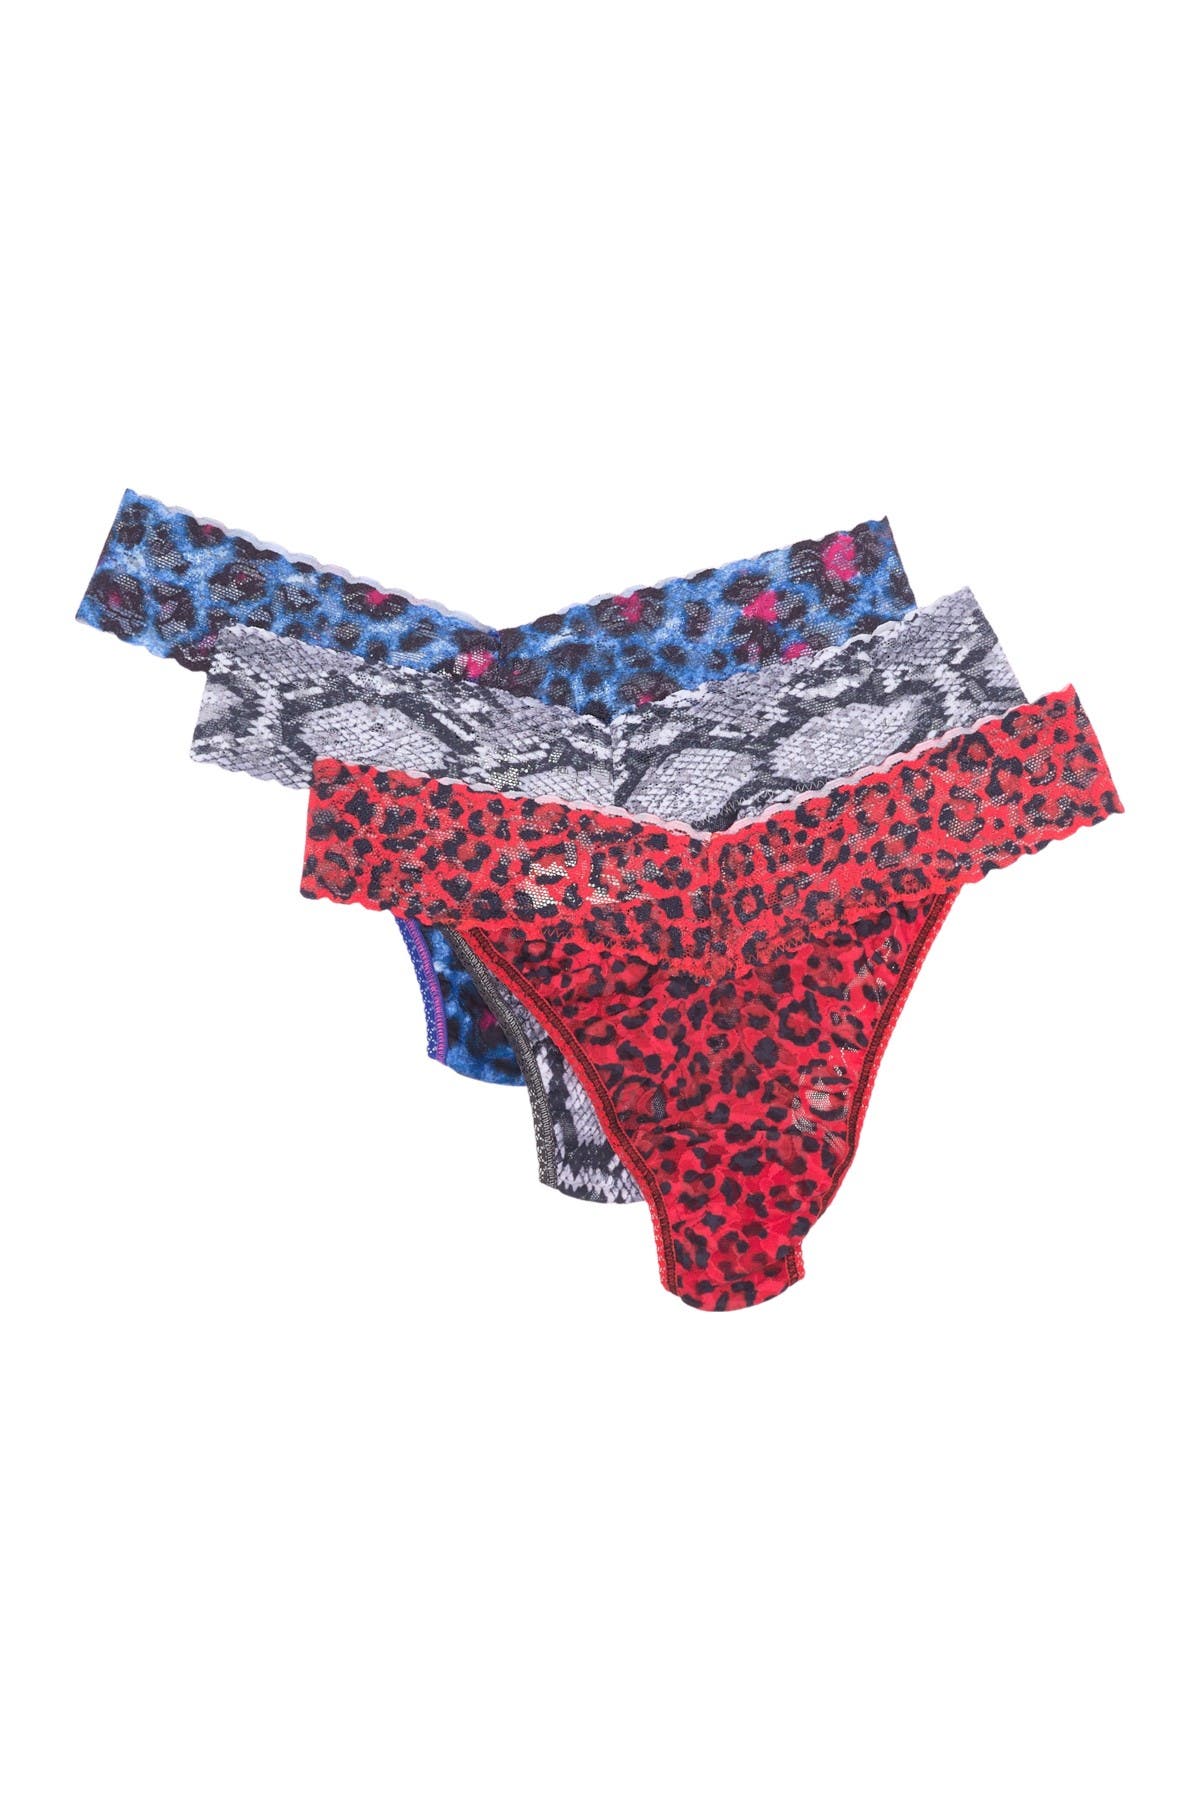 Hanky Panky Original Rise Lace Thongs In On The Prowl/grey Py